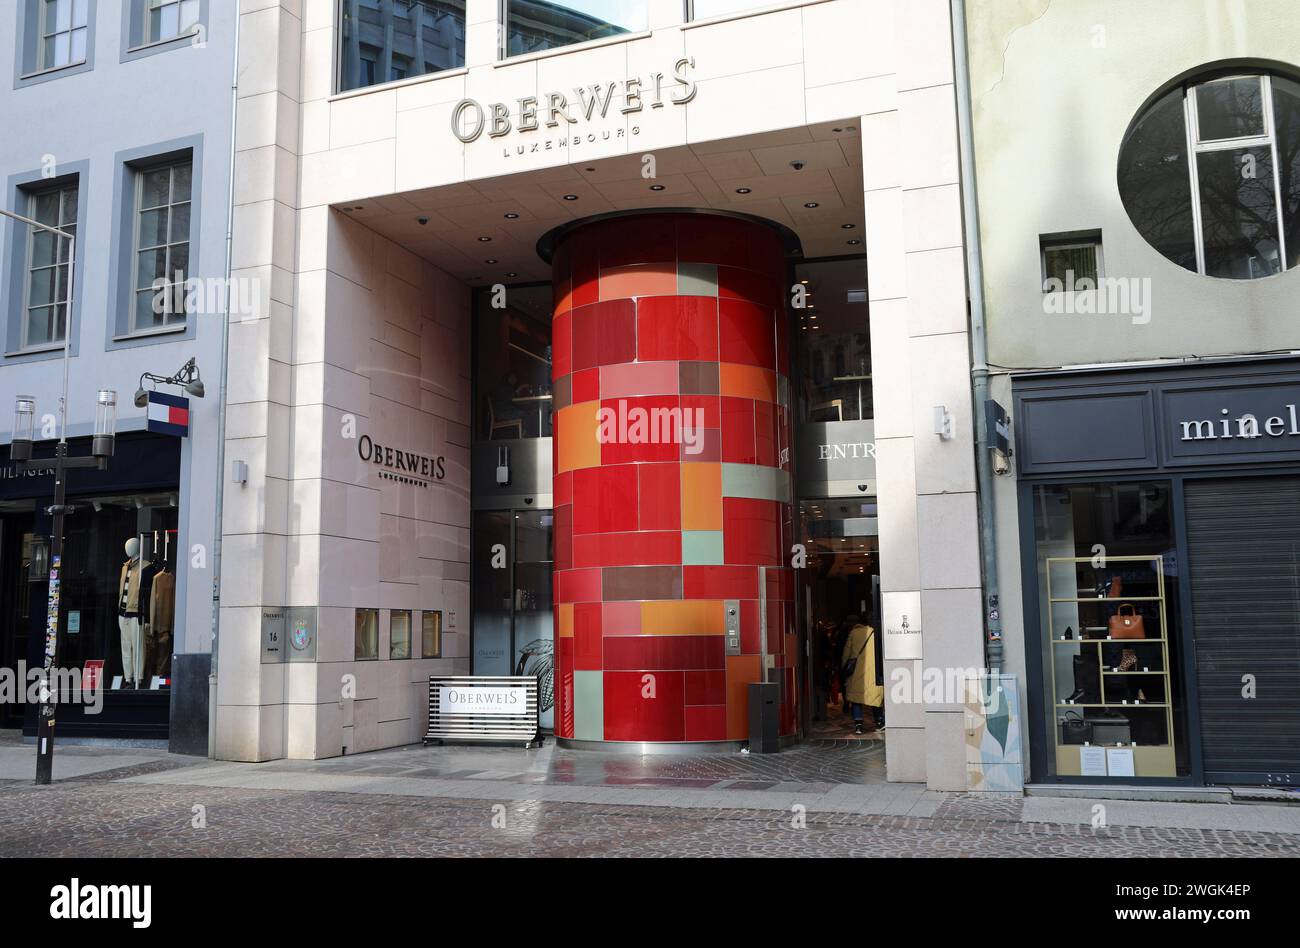 Oberweis shop in Luxembourg City Stock Photo